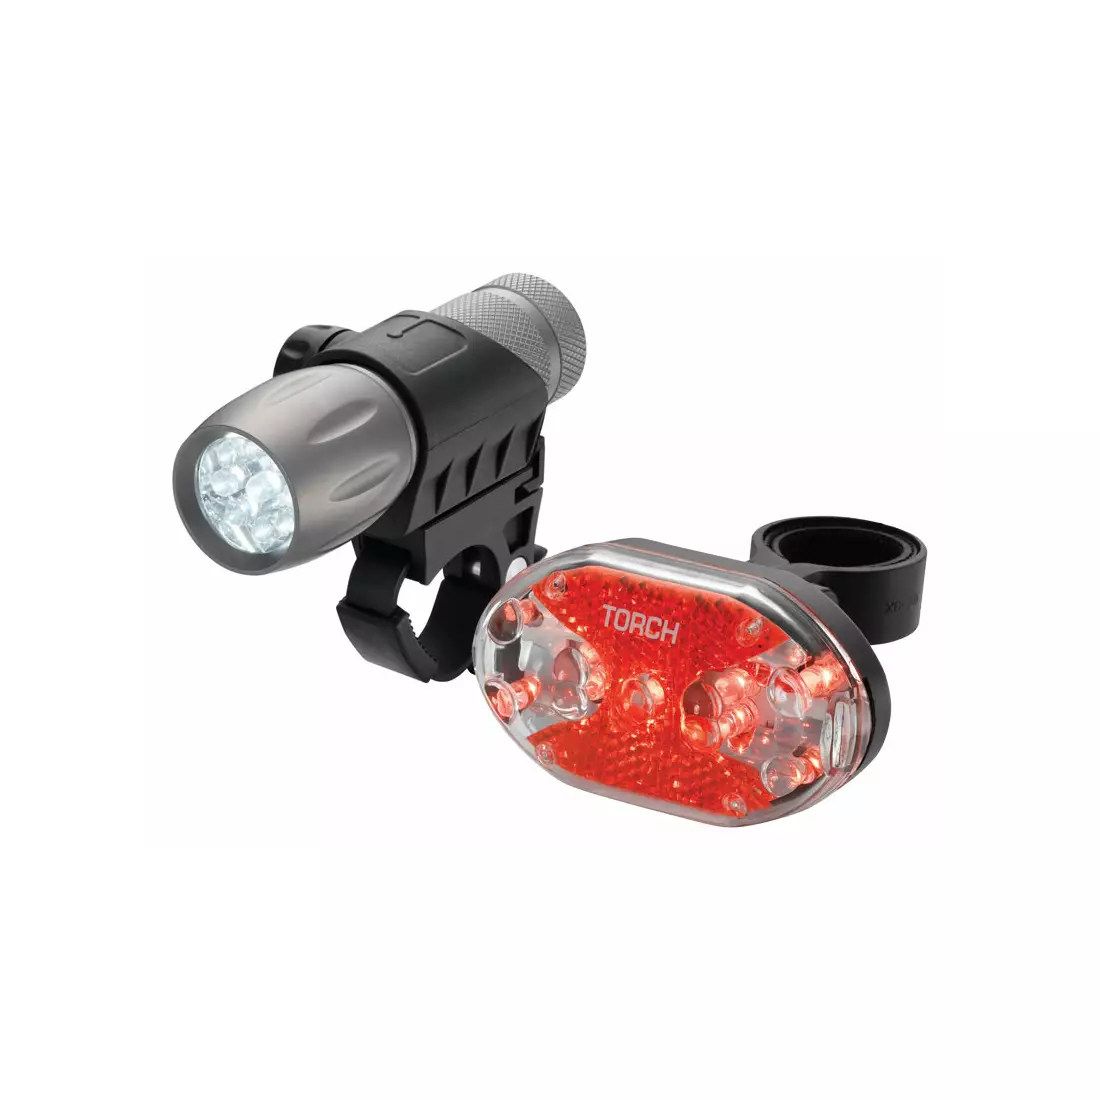 TORCH CYCLE LIGHT SET HIGH BEAMER TACTICAL 9 + TAIL BRIGHT 9X TOR-54030